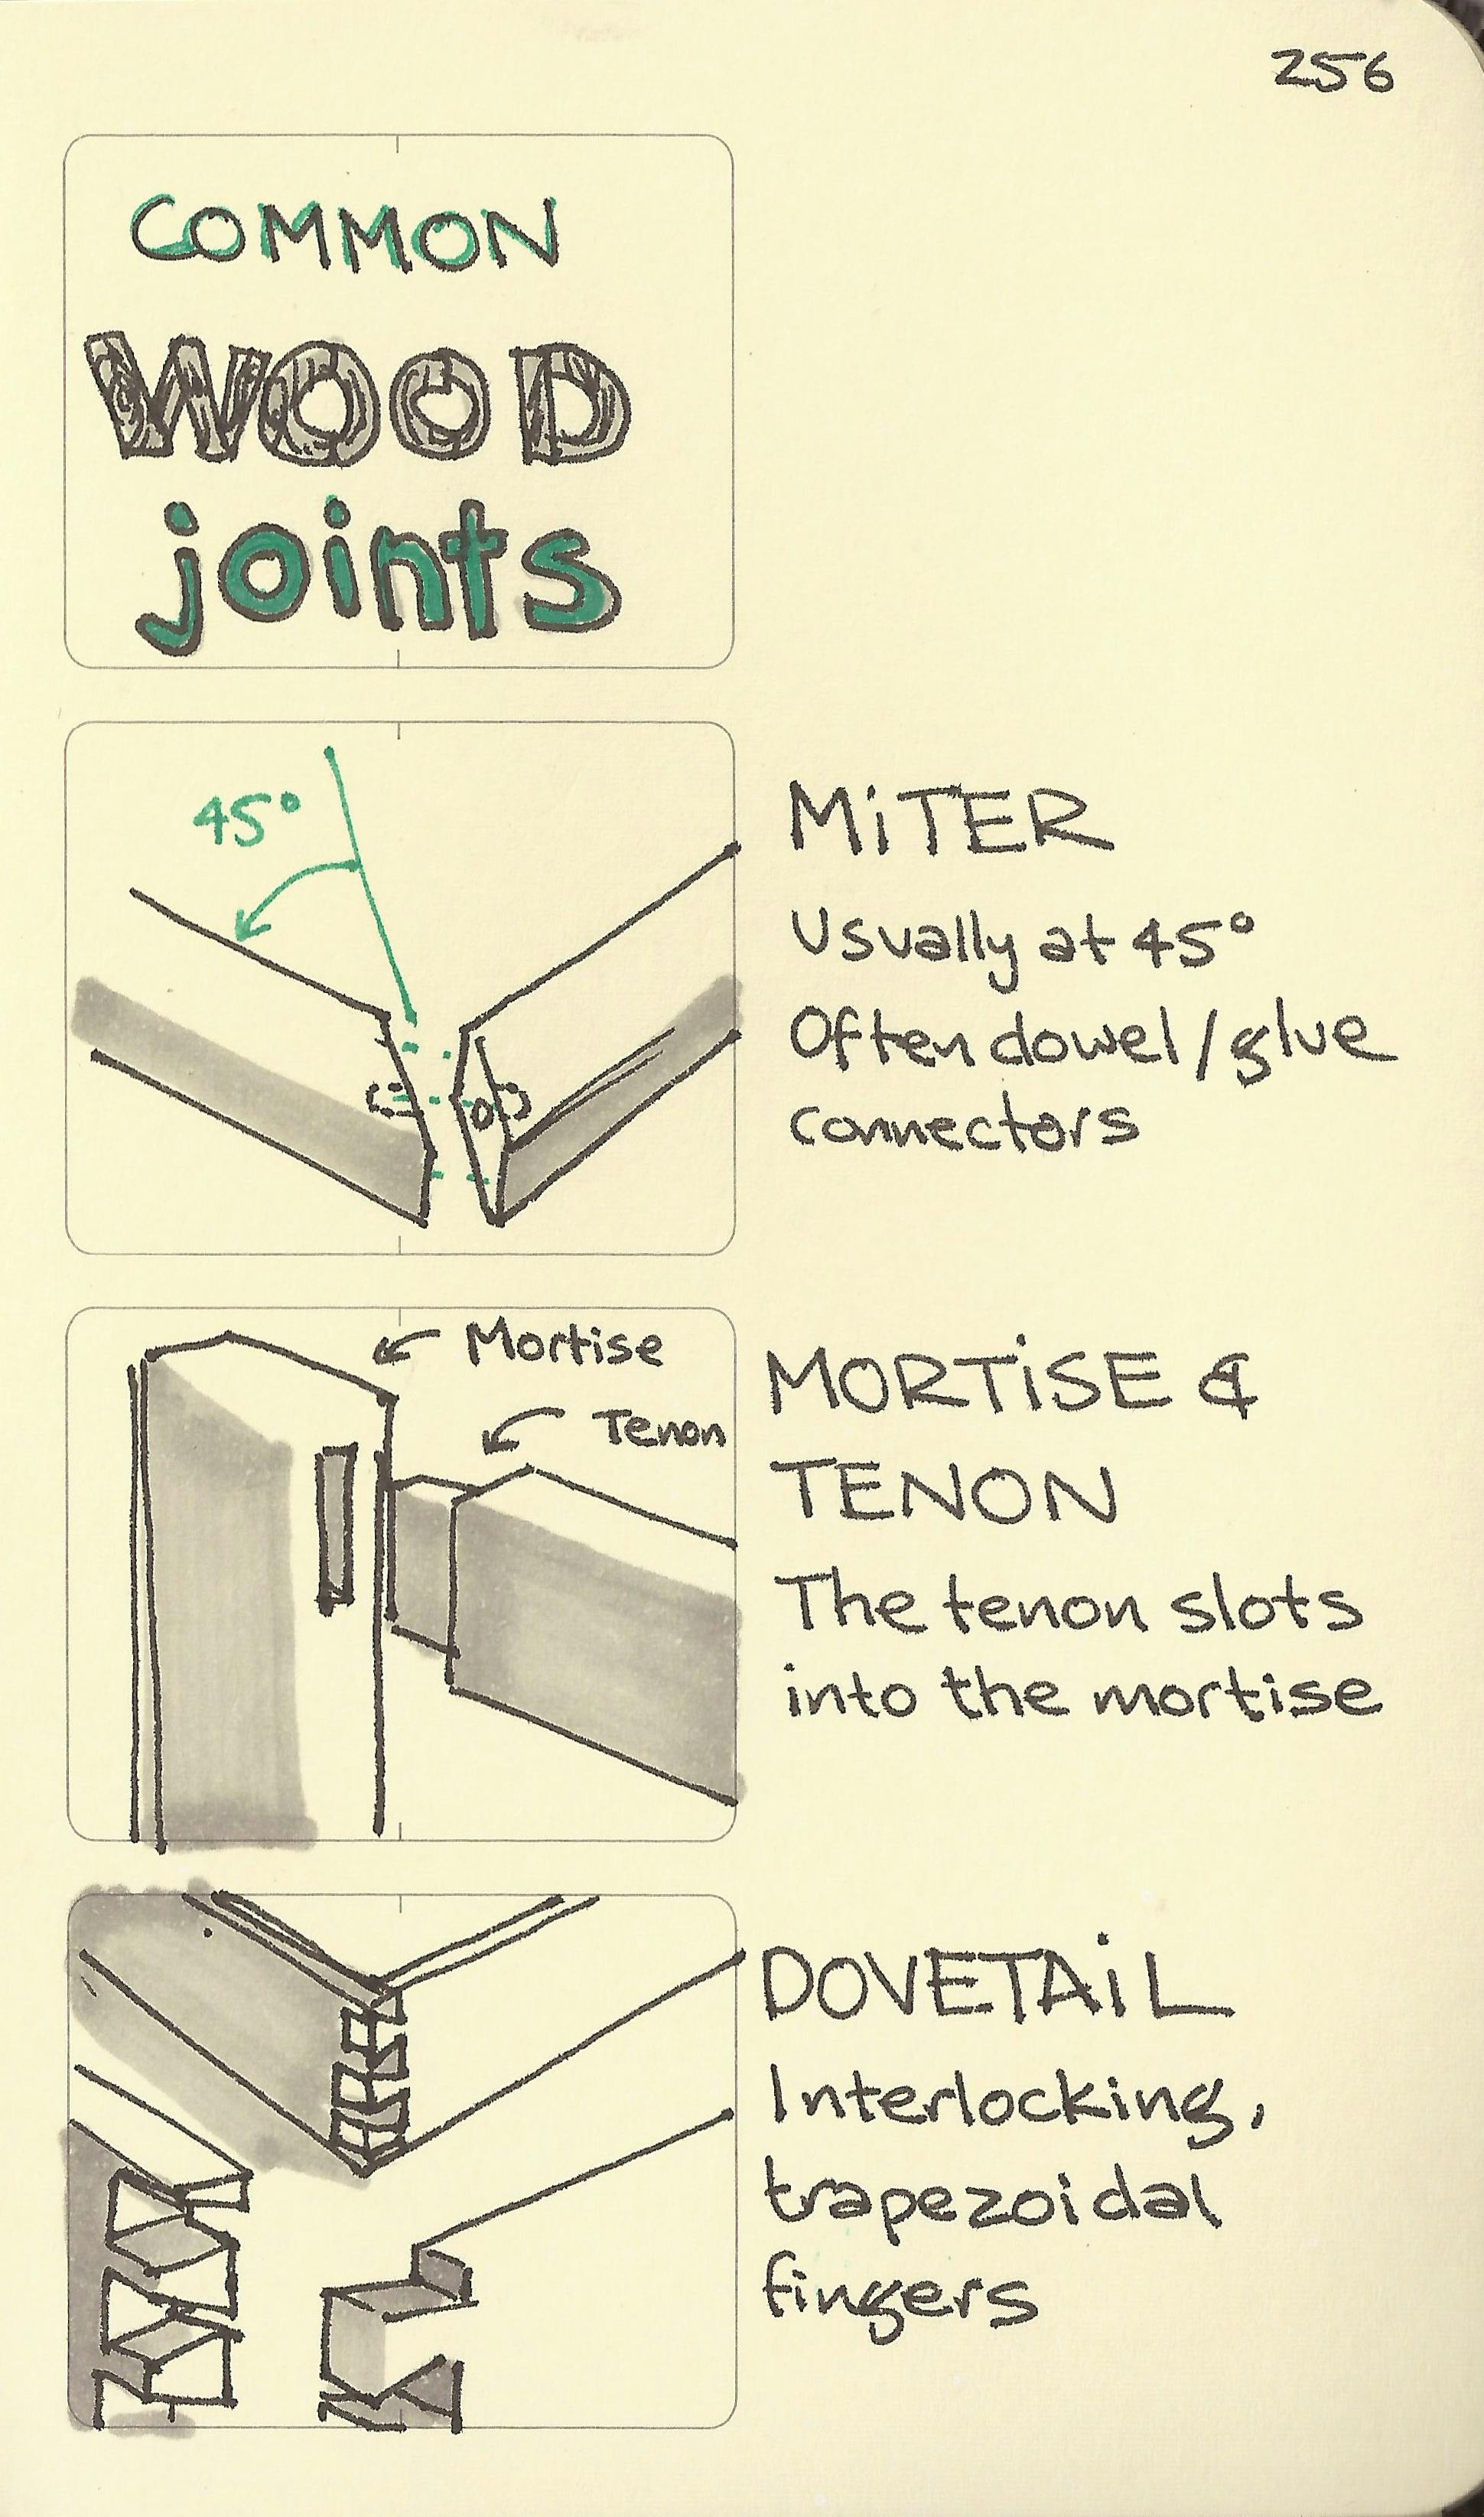 Common wood joints - Sketchplanations